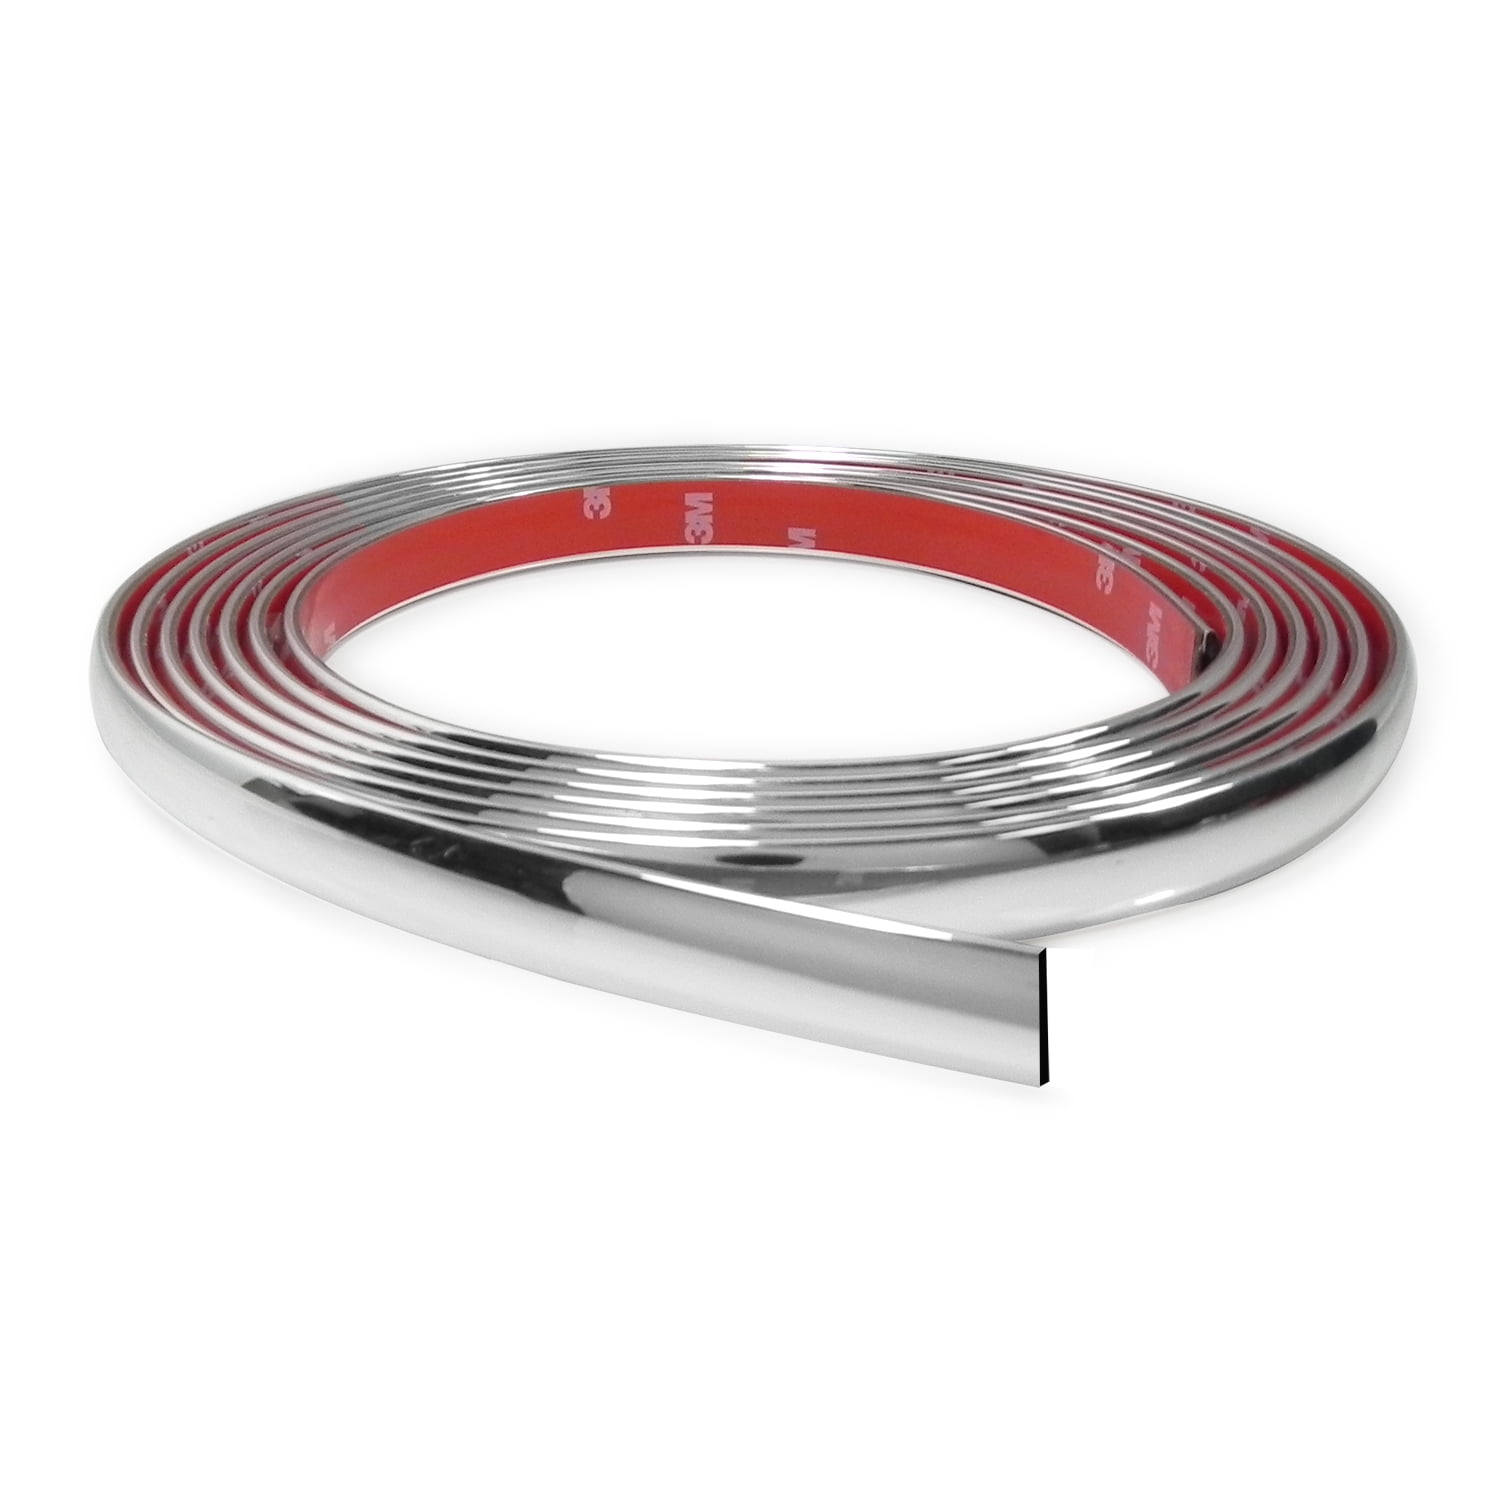 10 Feet Chrome Finish 5/8 Inches Auto Body Molding Trim and Wheel Well ...